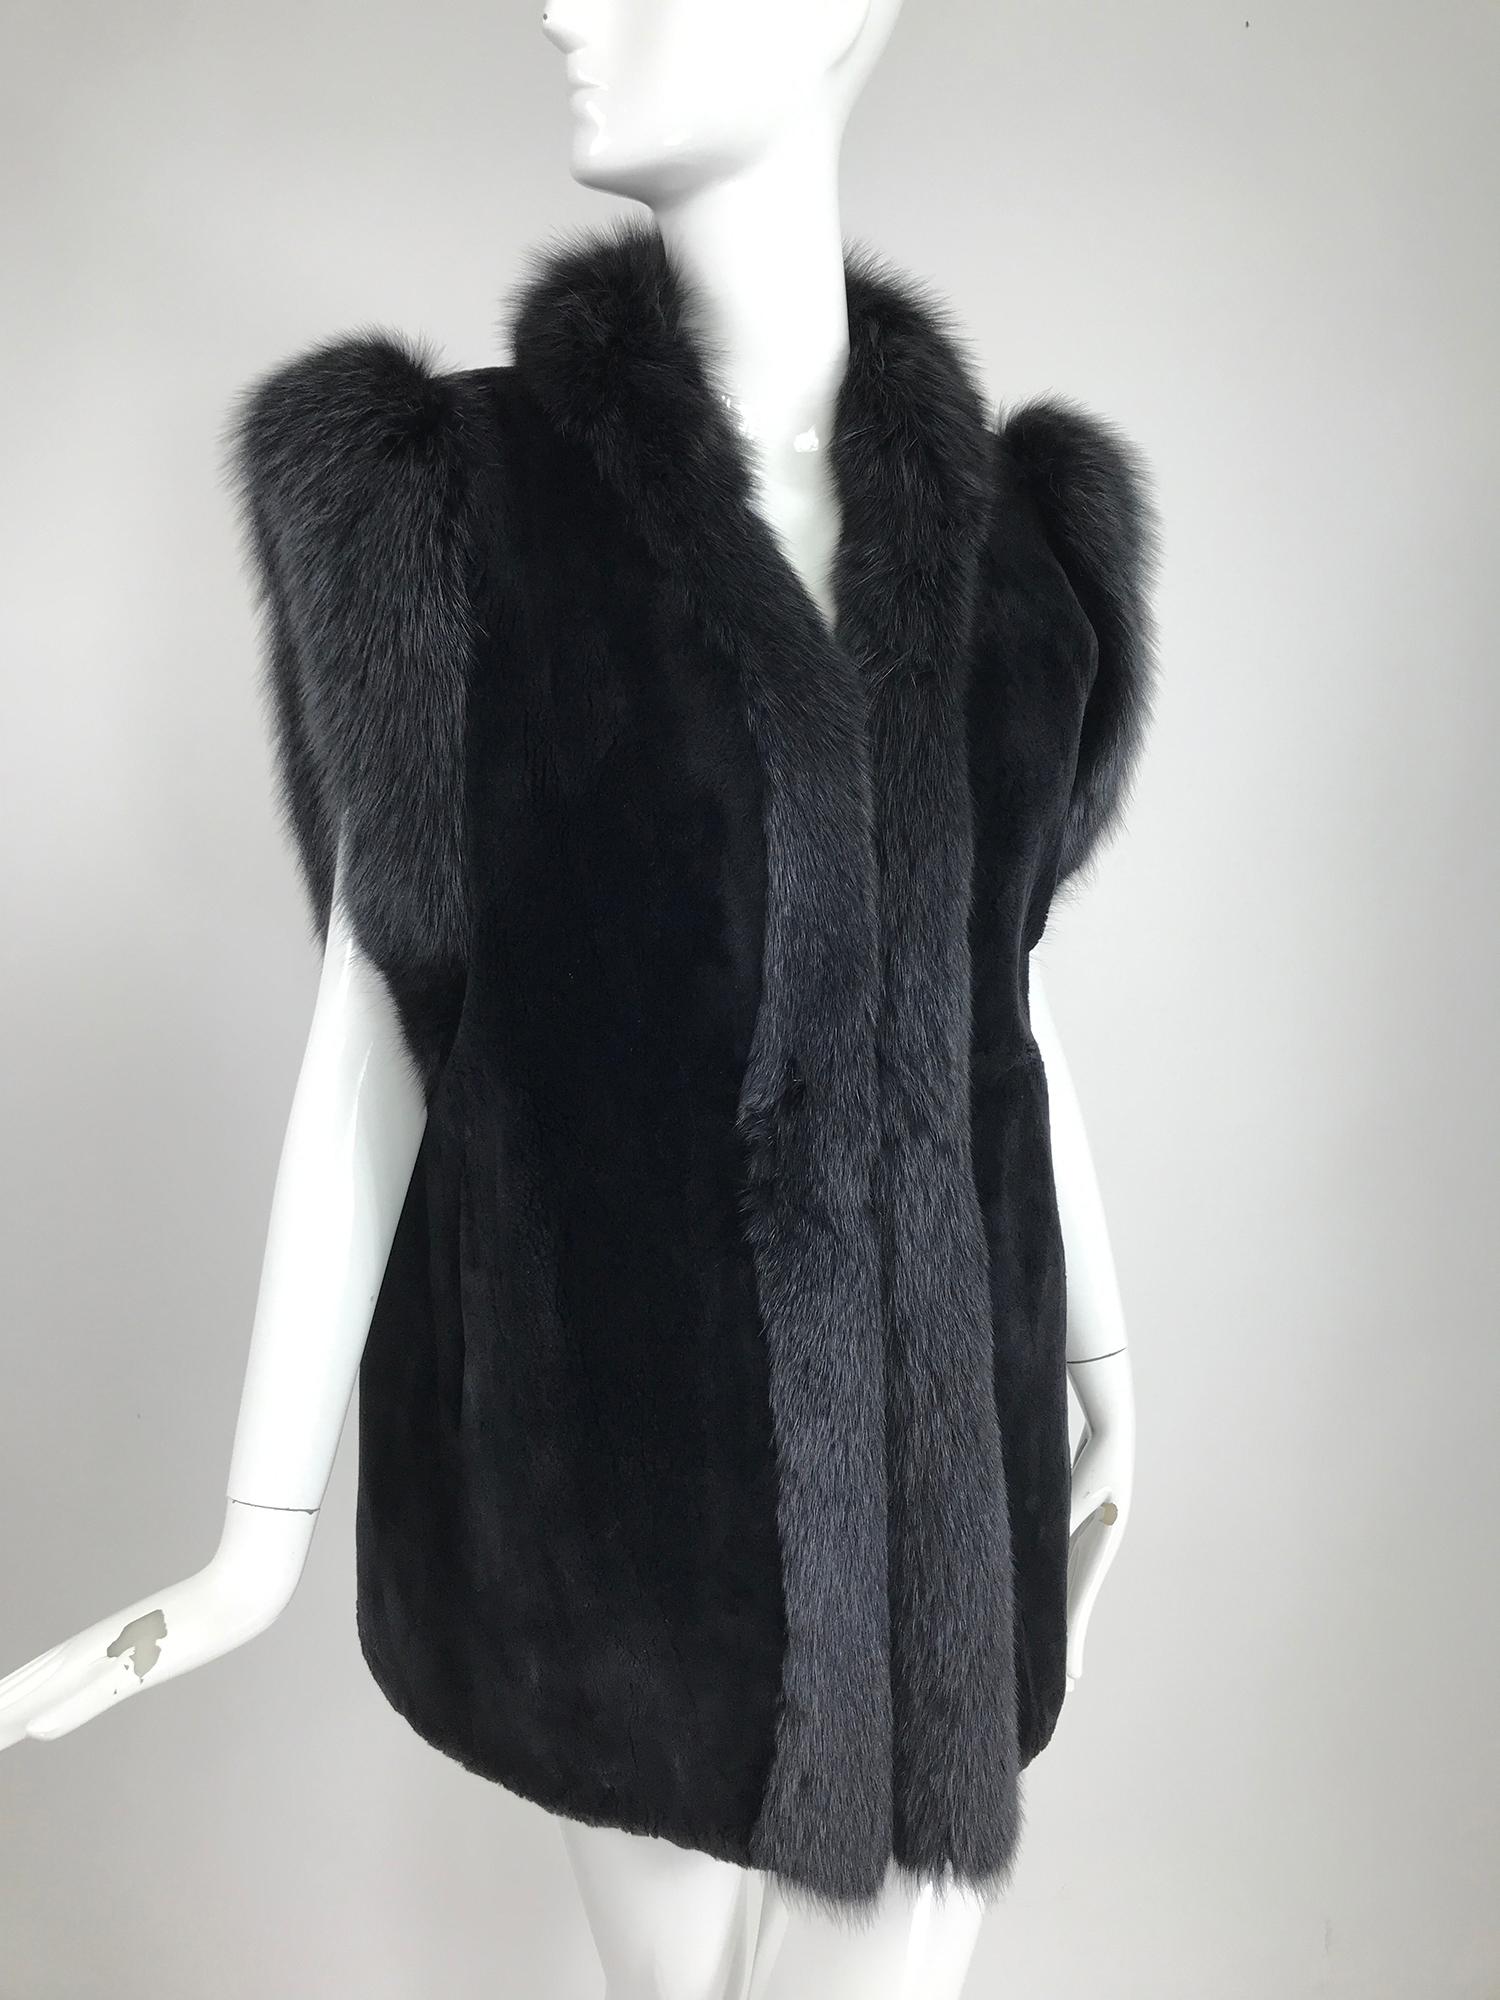 Black sheared beaver with fox trim Gilet or vest, vintage from the 1970s. Beautiful and soft sheared beaver has arm openings and front facings of black fox. Fully lined in black taffeta. Deep arm openings. Front pockets. Closes at the front center